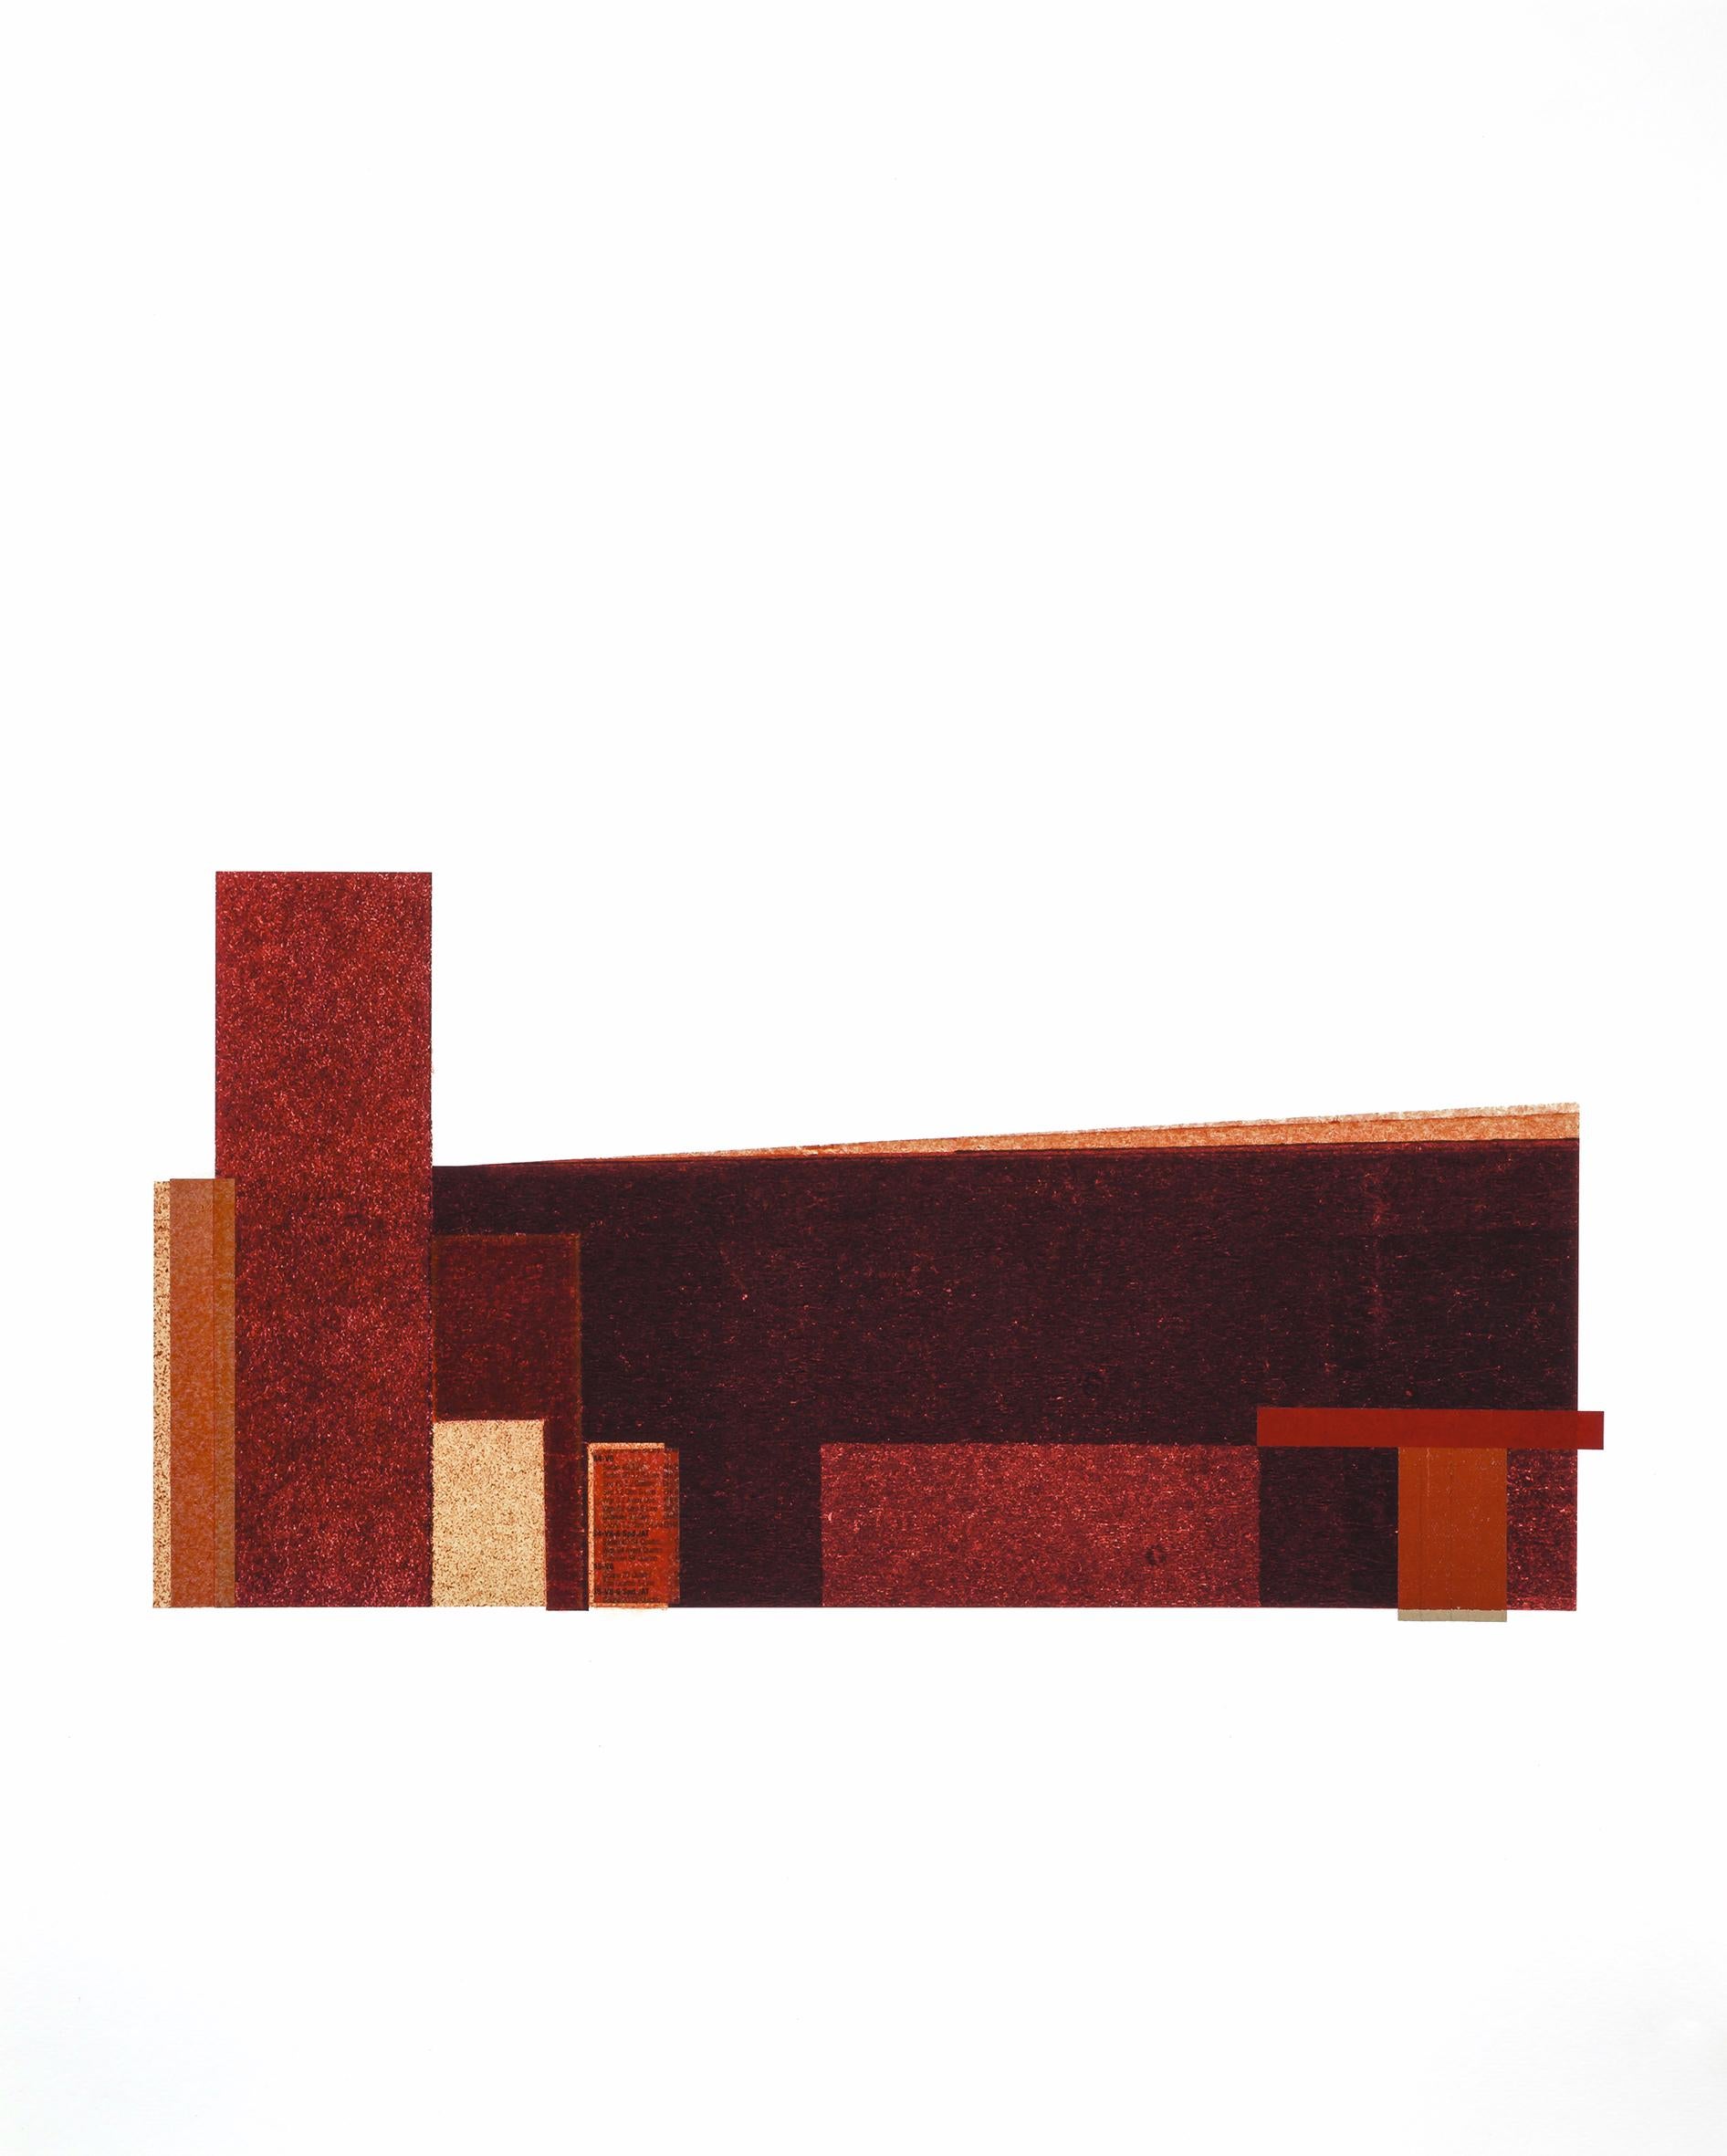 Agathe Bouton Landscape Art - Factory IX: modernist urban architectural collage on monoprint in red, framed